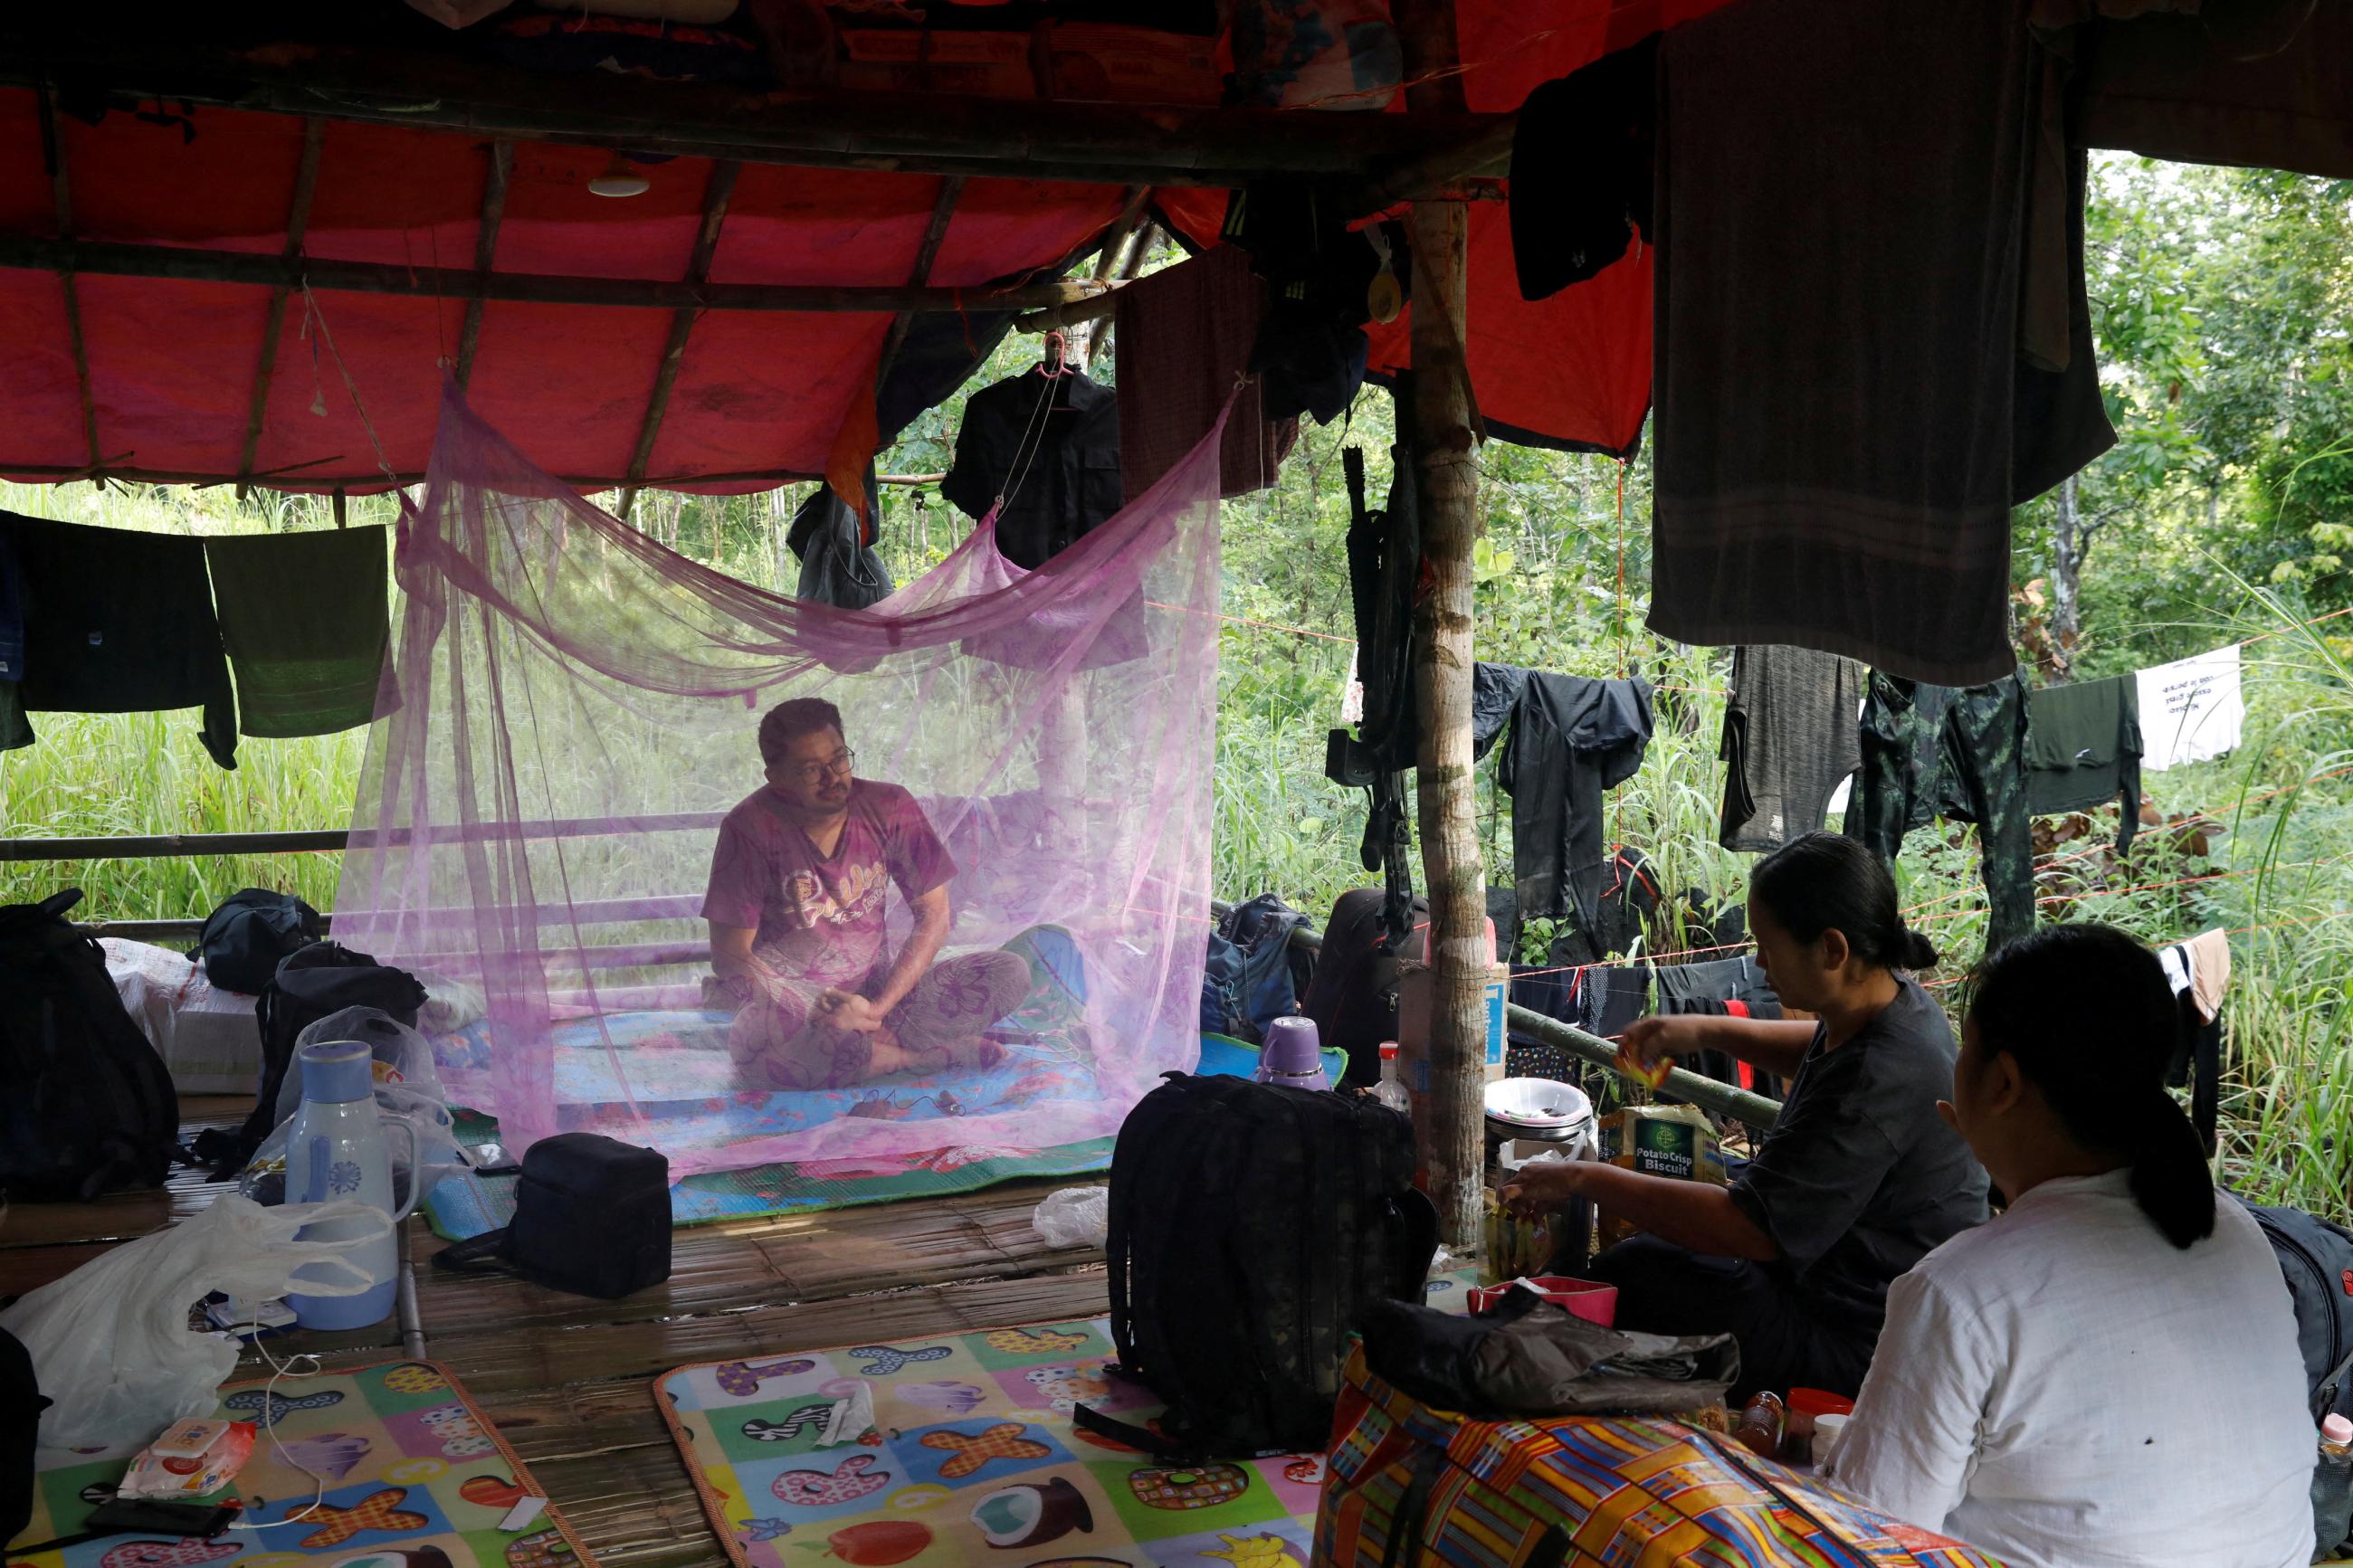 Sithu Maung, an elected member of parliament in the 2020 elections, sits under a mosquito net at a training camp in an area controlled by ethnic Karen rebels, Karen State, Myanmar, on September 13, 2021. REUTERS/Independent photographer 